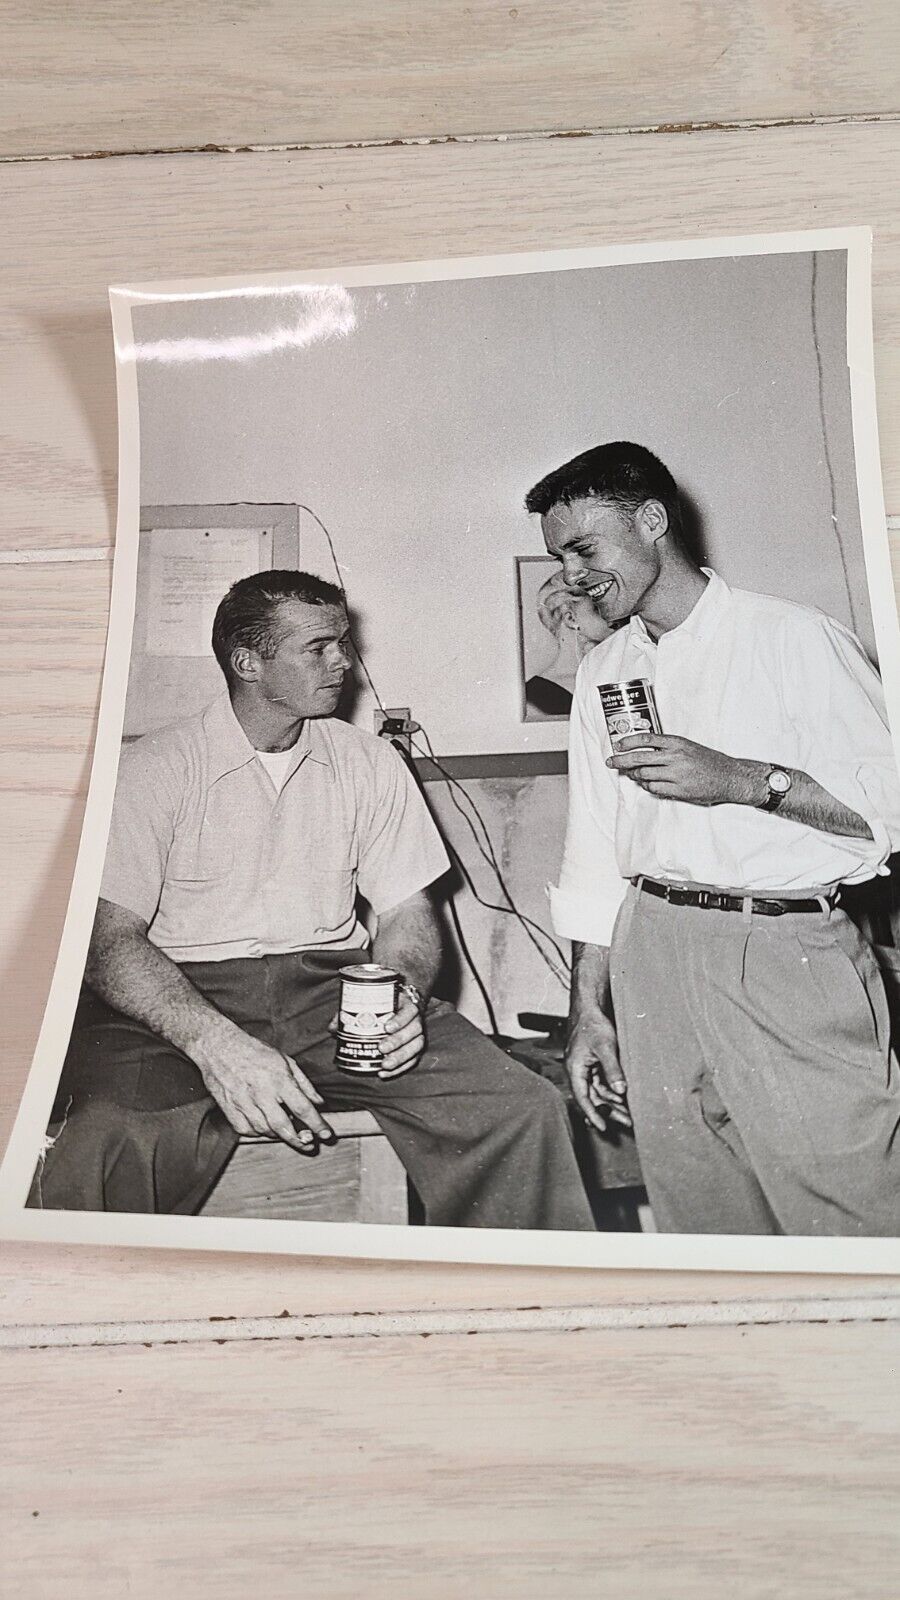 Vintage 8x10 Glossy Black And White Photograph Two Gentlemen Drinking Budweiser